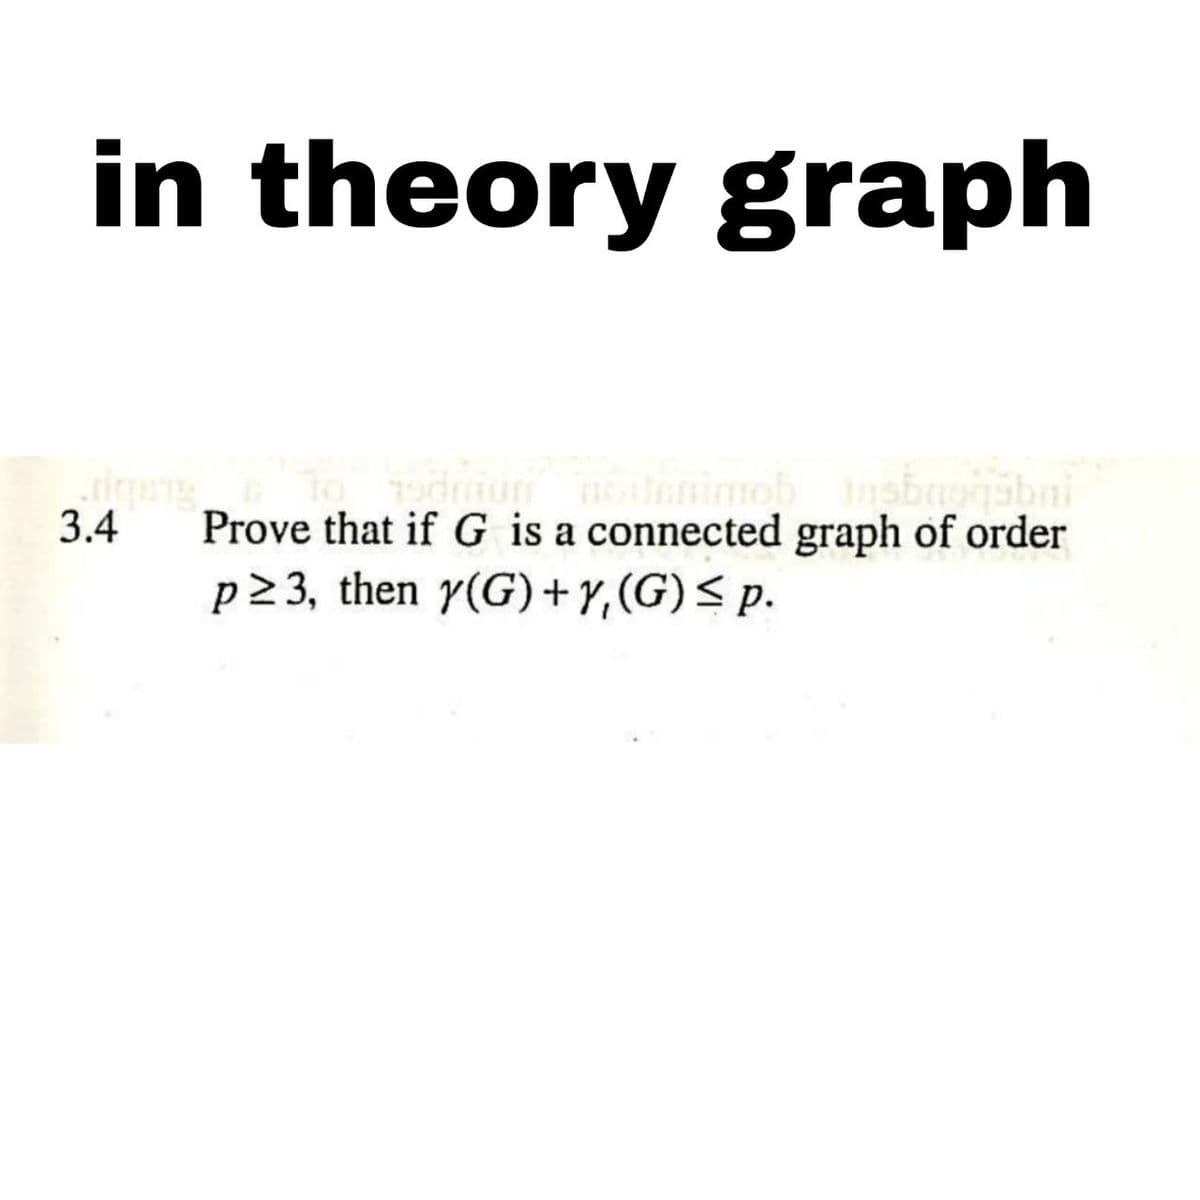 in theory graph
todmum notenimob Insbransb
3.4 Prove that if G is a connected graph of order
p≥3, then y(G) +Y, (G) ≤ p.